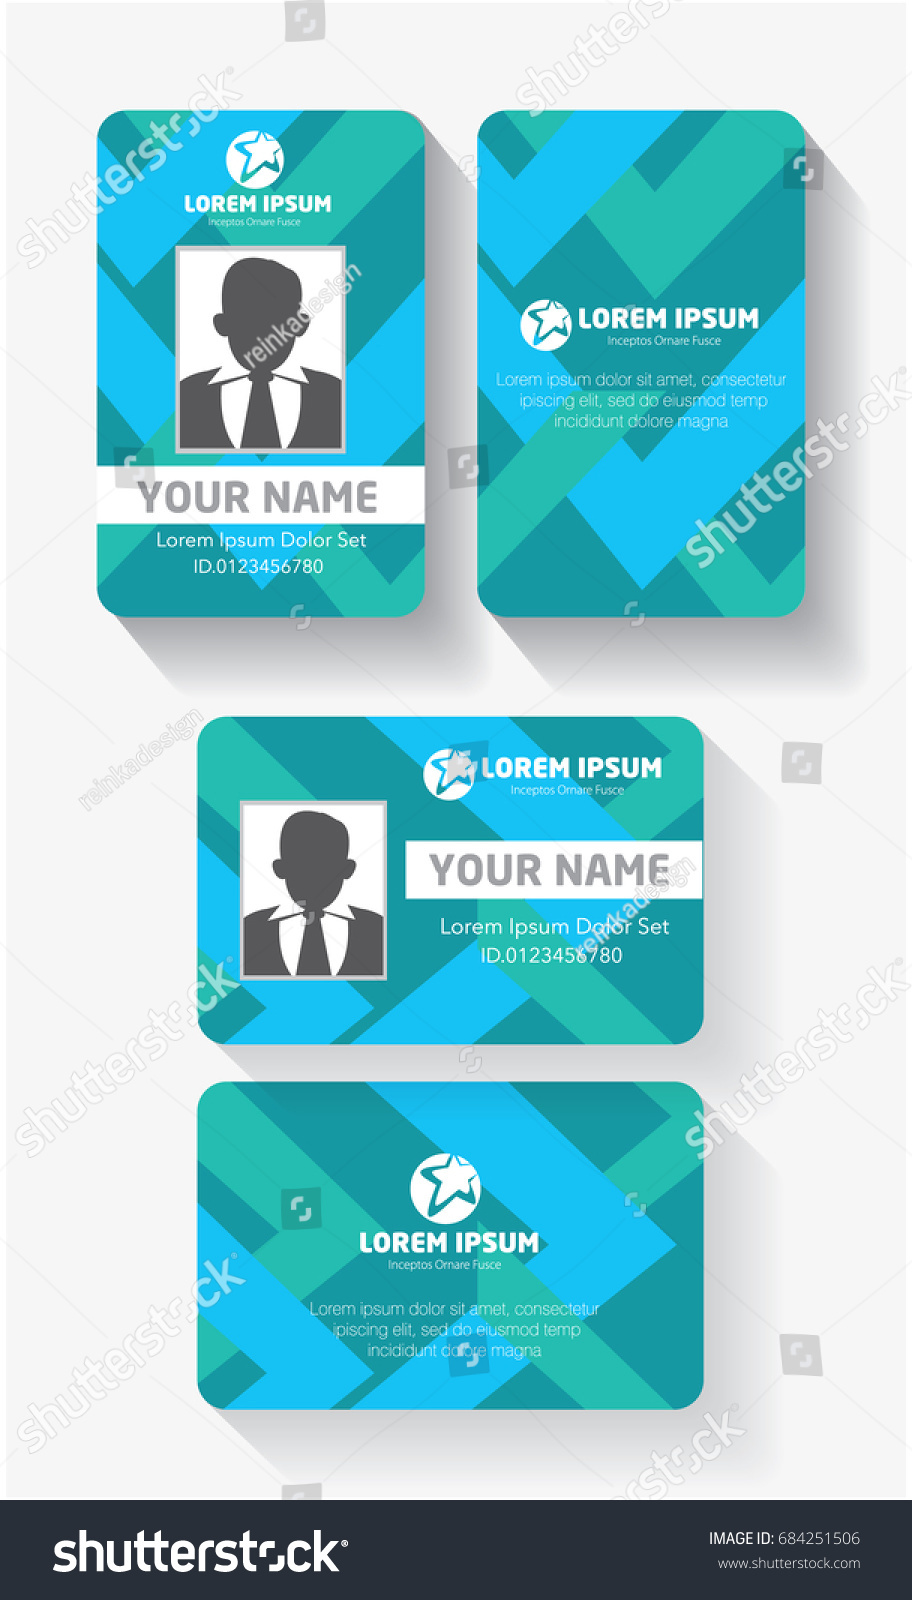 User id card set with color element and photo templates isolated vector illustration #684251506